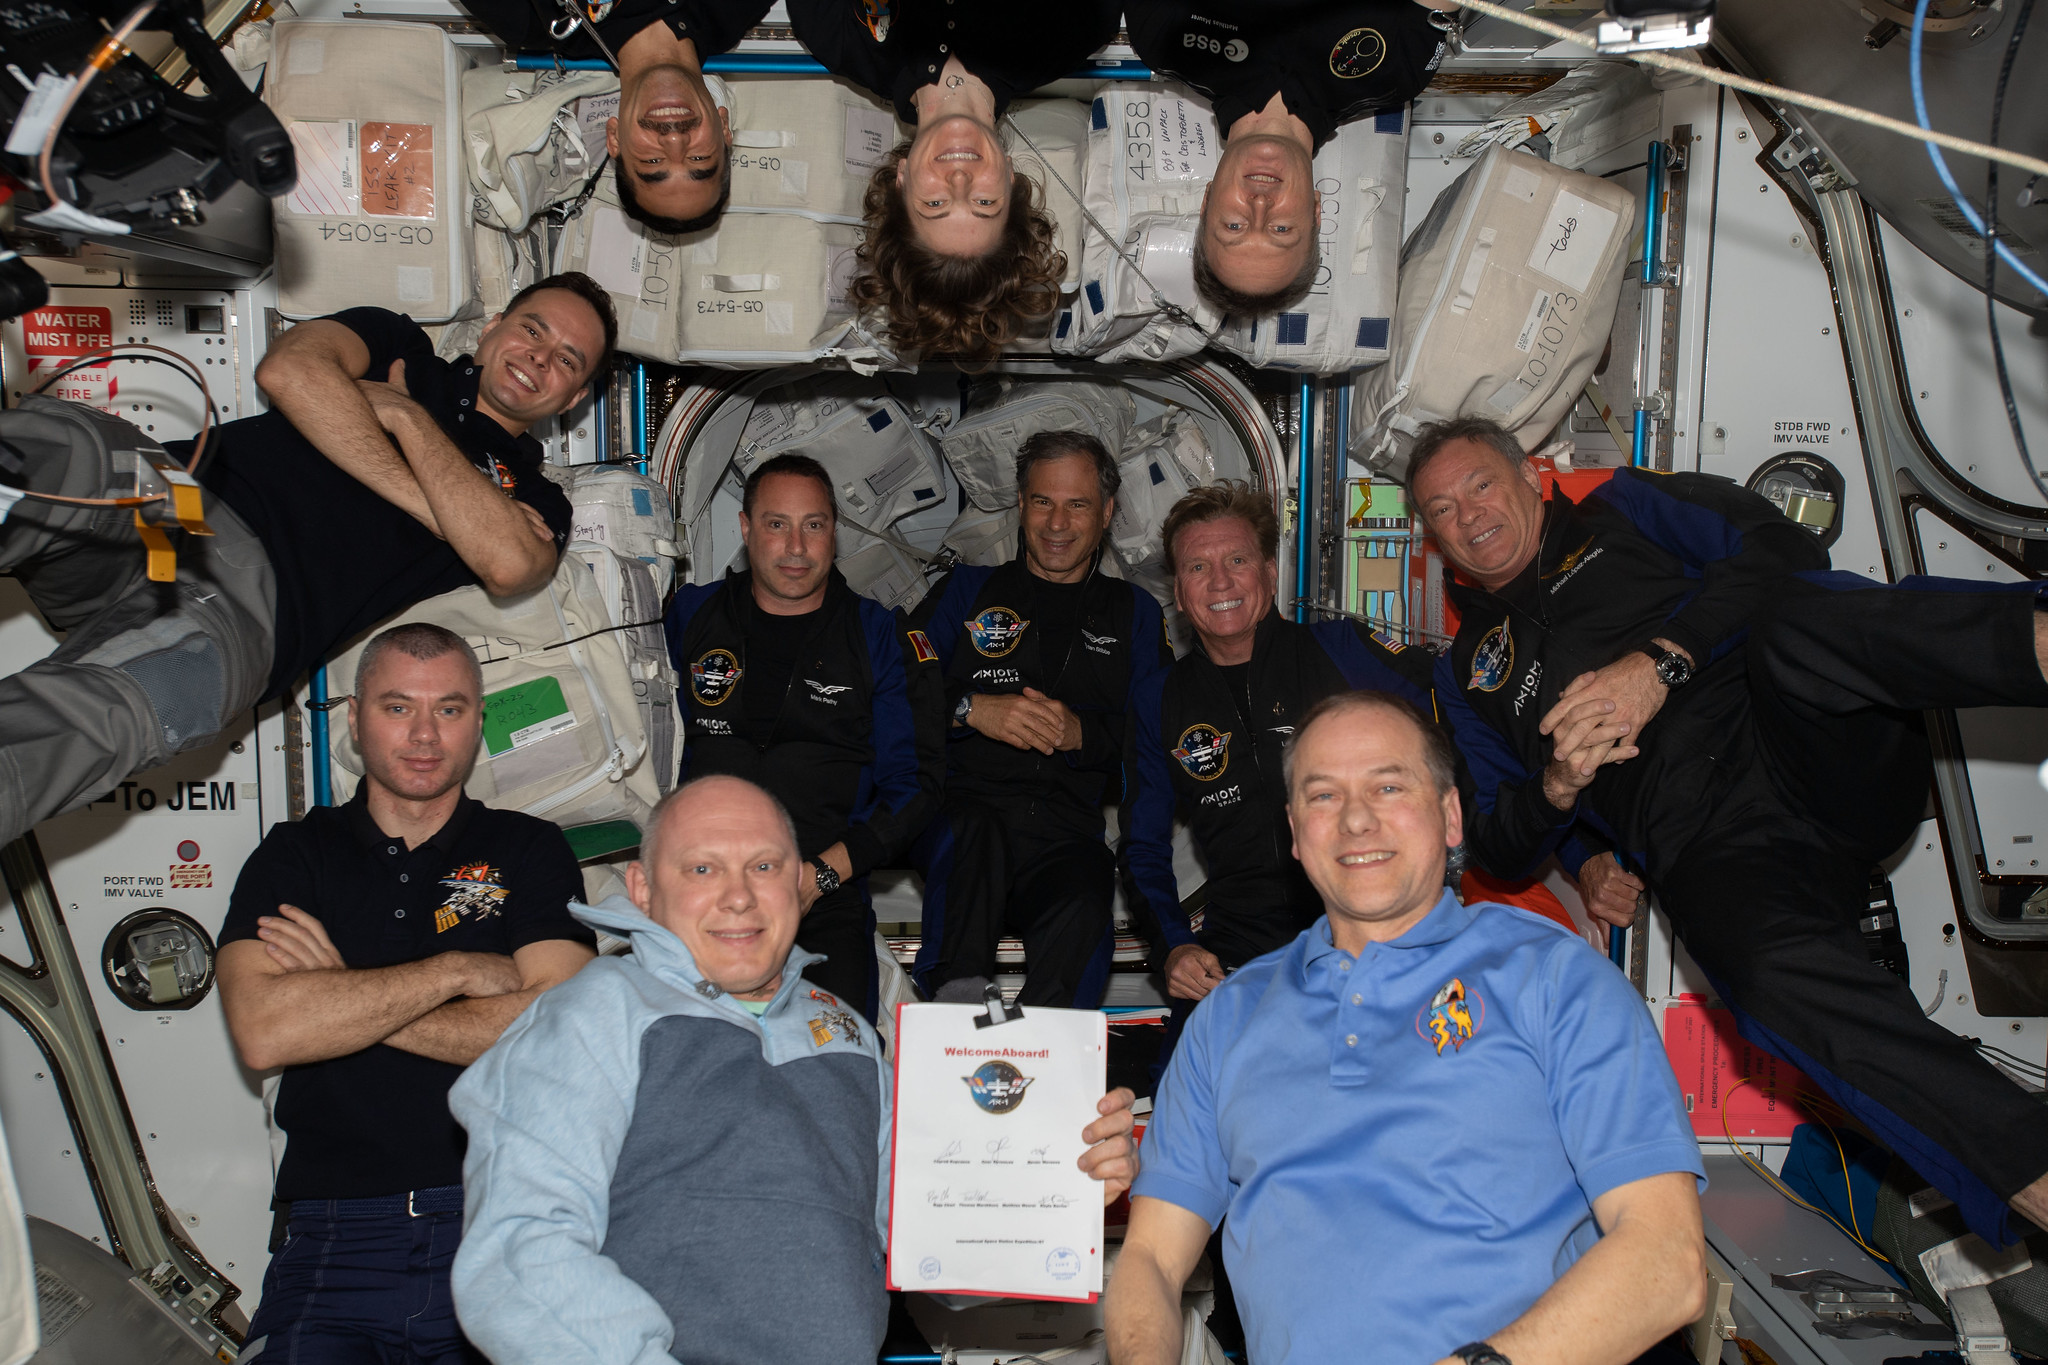 The 11-person crew aboard the International Space Station